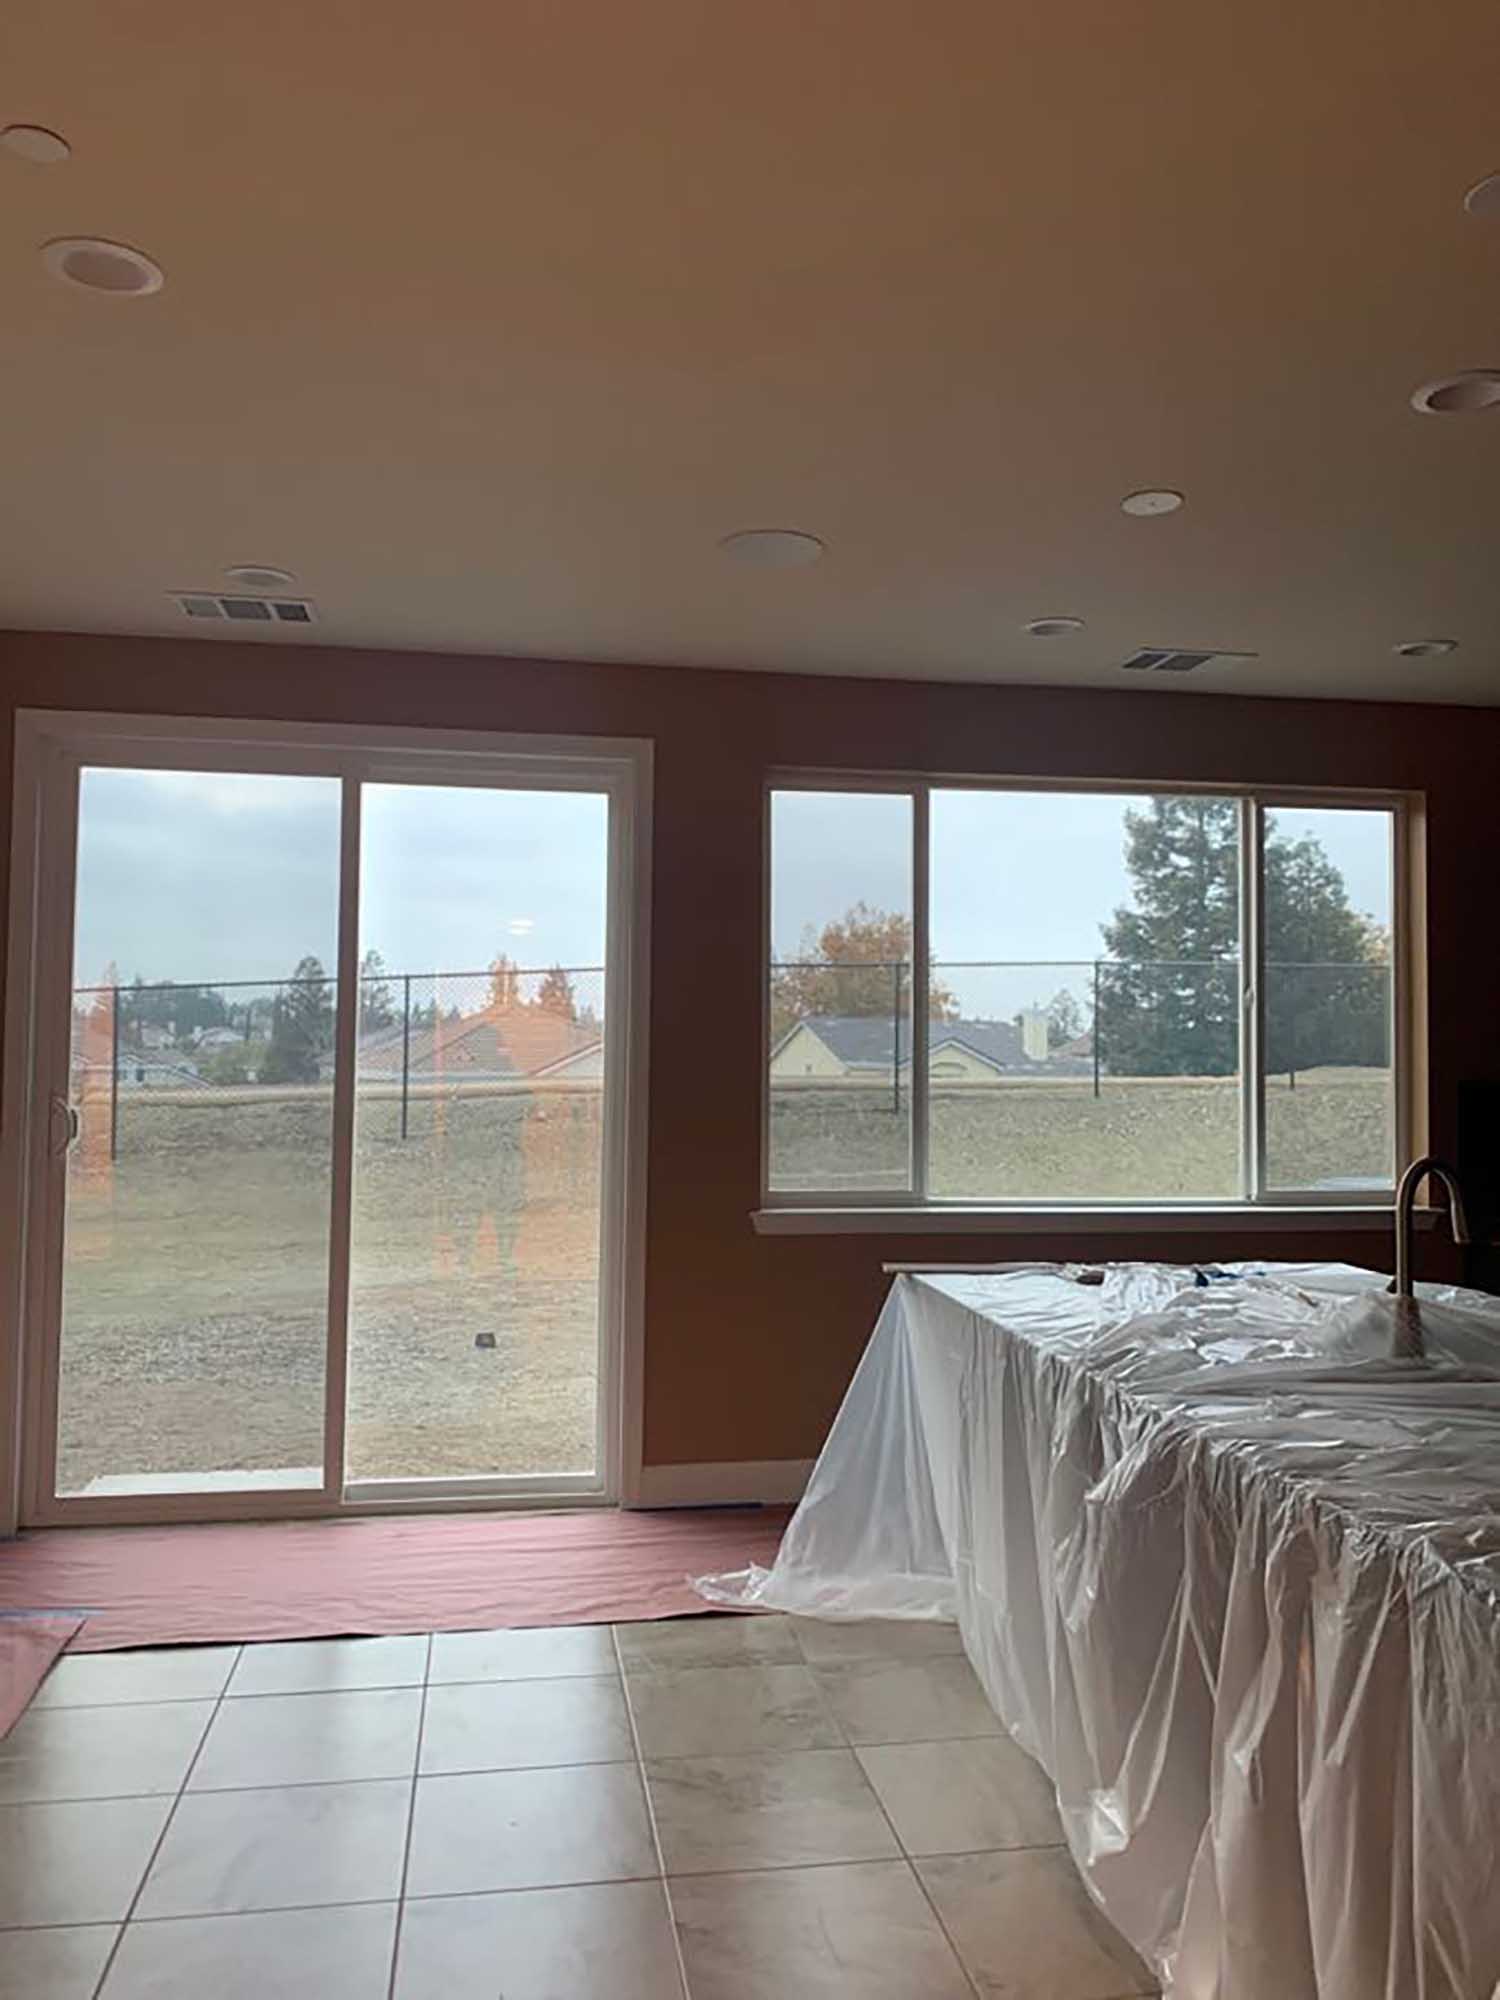 Affordable Home Window Film for Antioch, CA, installed by ClimatePro. Free estimates on window film for the entire San Francisco Bay Area.